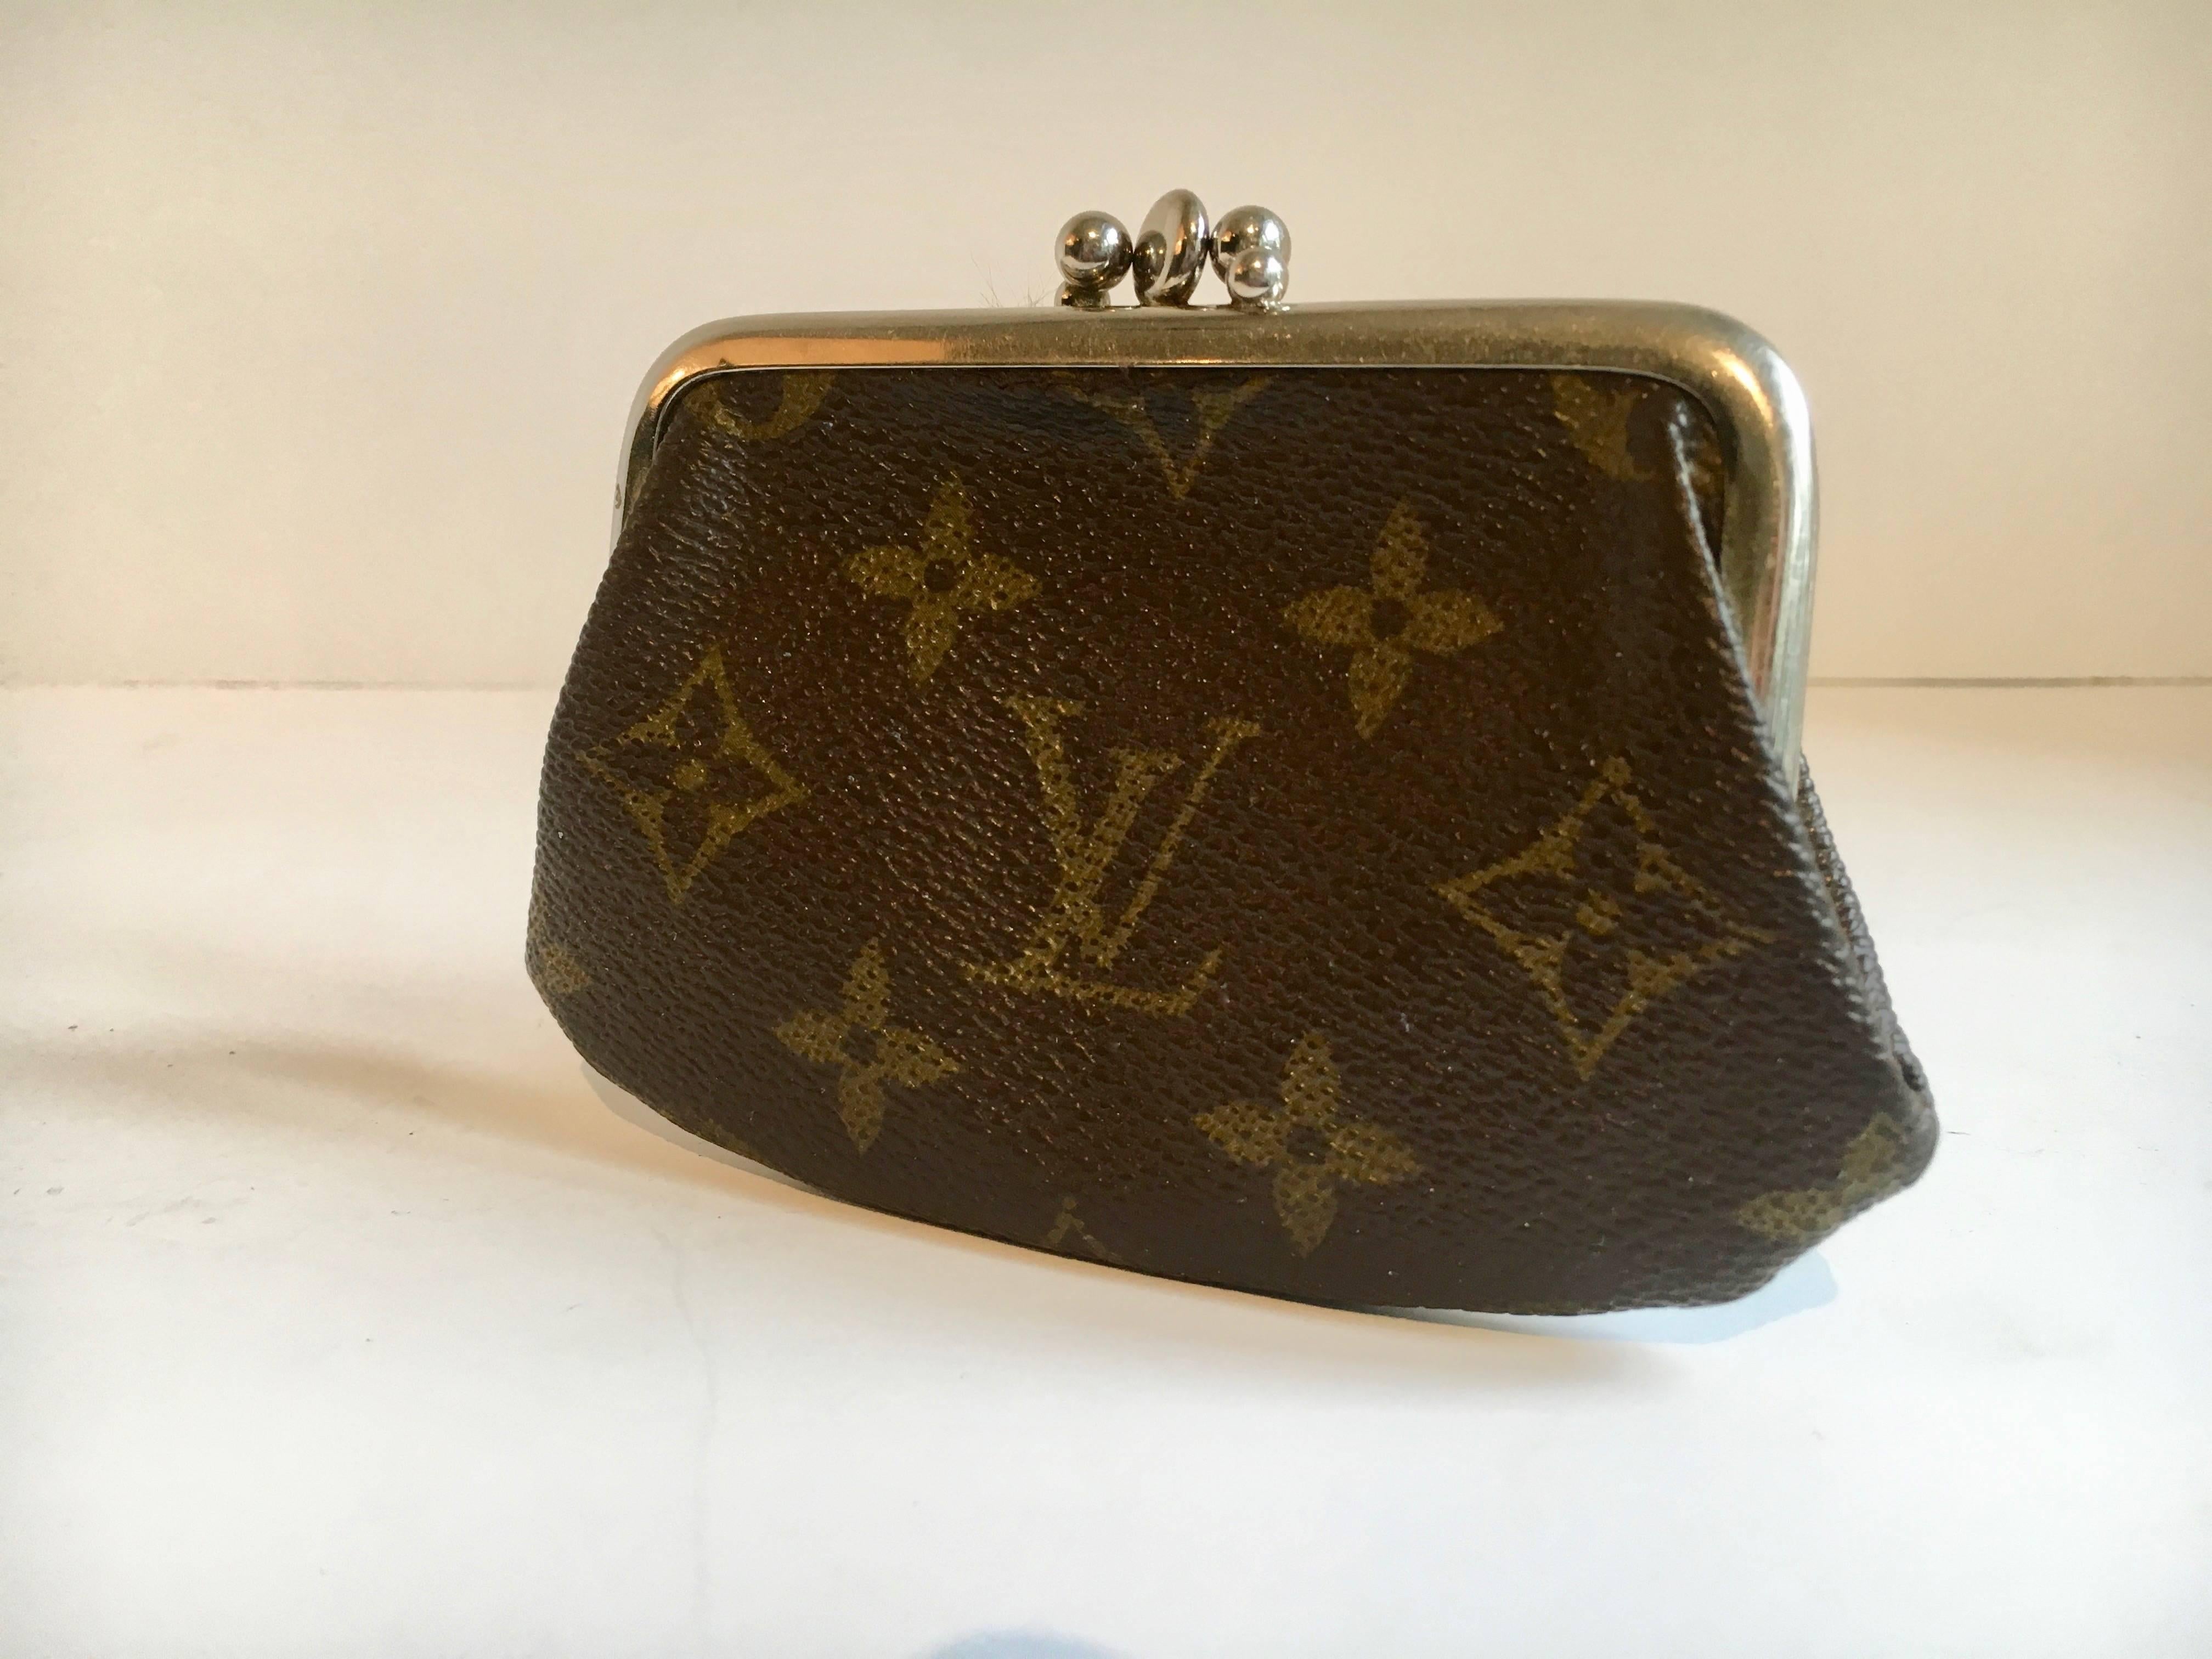 Rare Two Compartment Louis Vuitton Coin Purse - a middle clear plastic divider allows one to see what is in the other side.  The Satin interior does have some condition issues on one side - we believe this truly adds to the beauty of the patinated